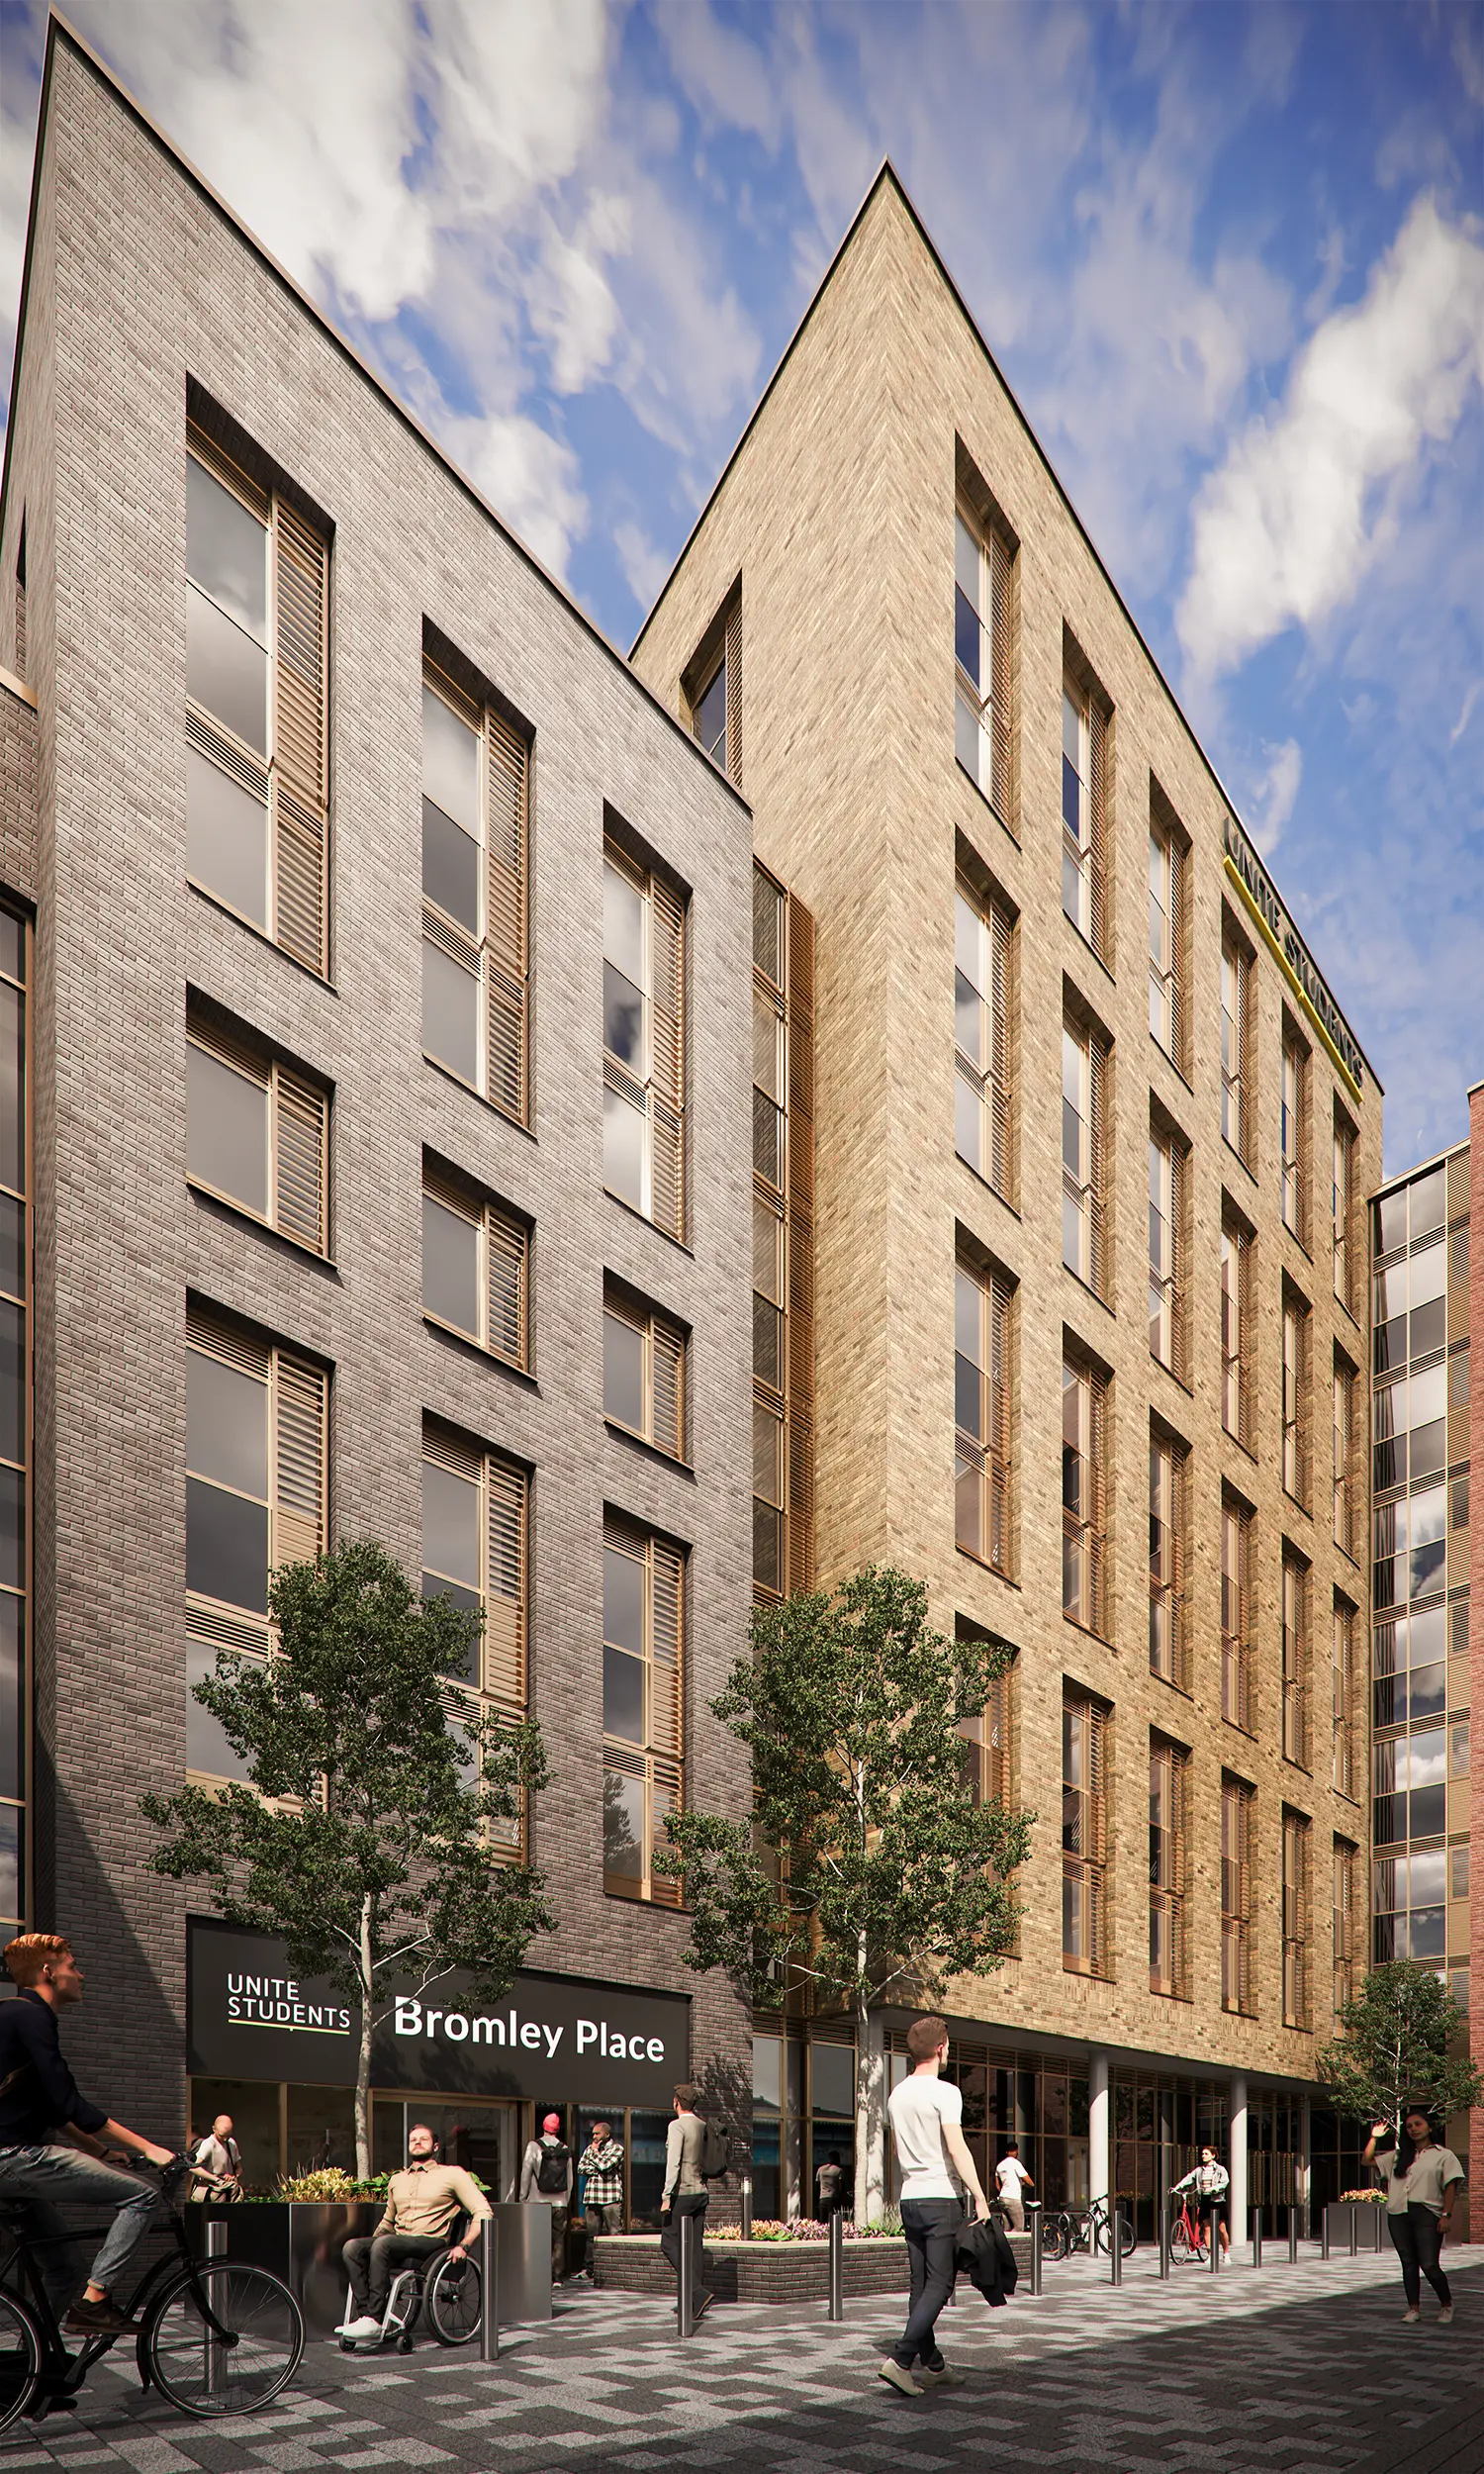 Exterior of the Bromley Place building (artist's impression)